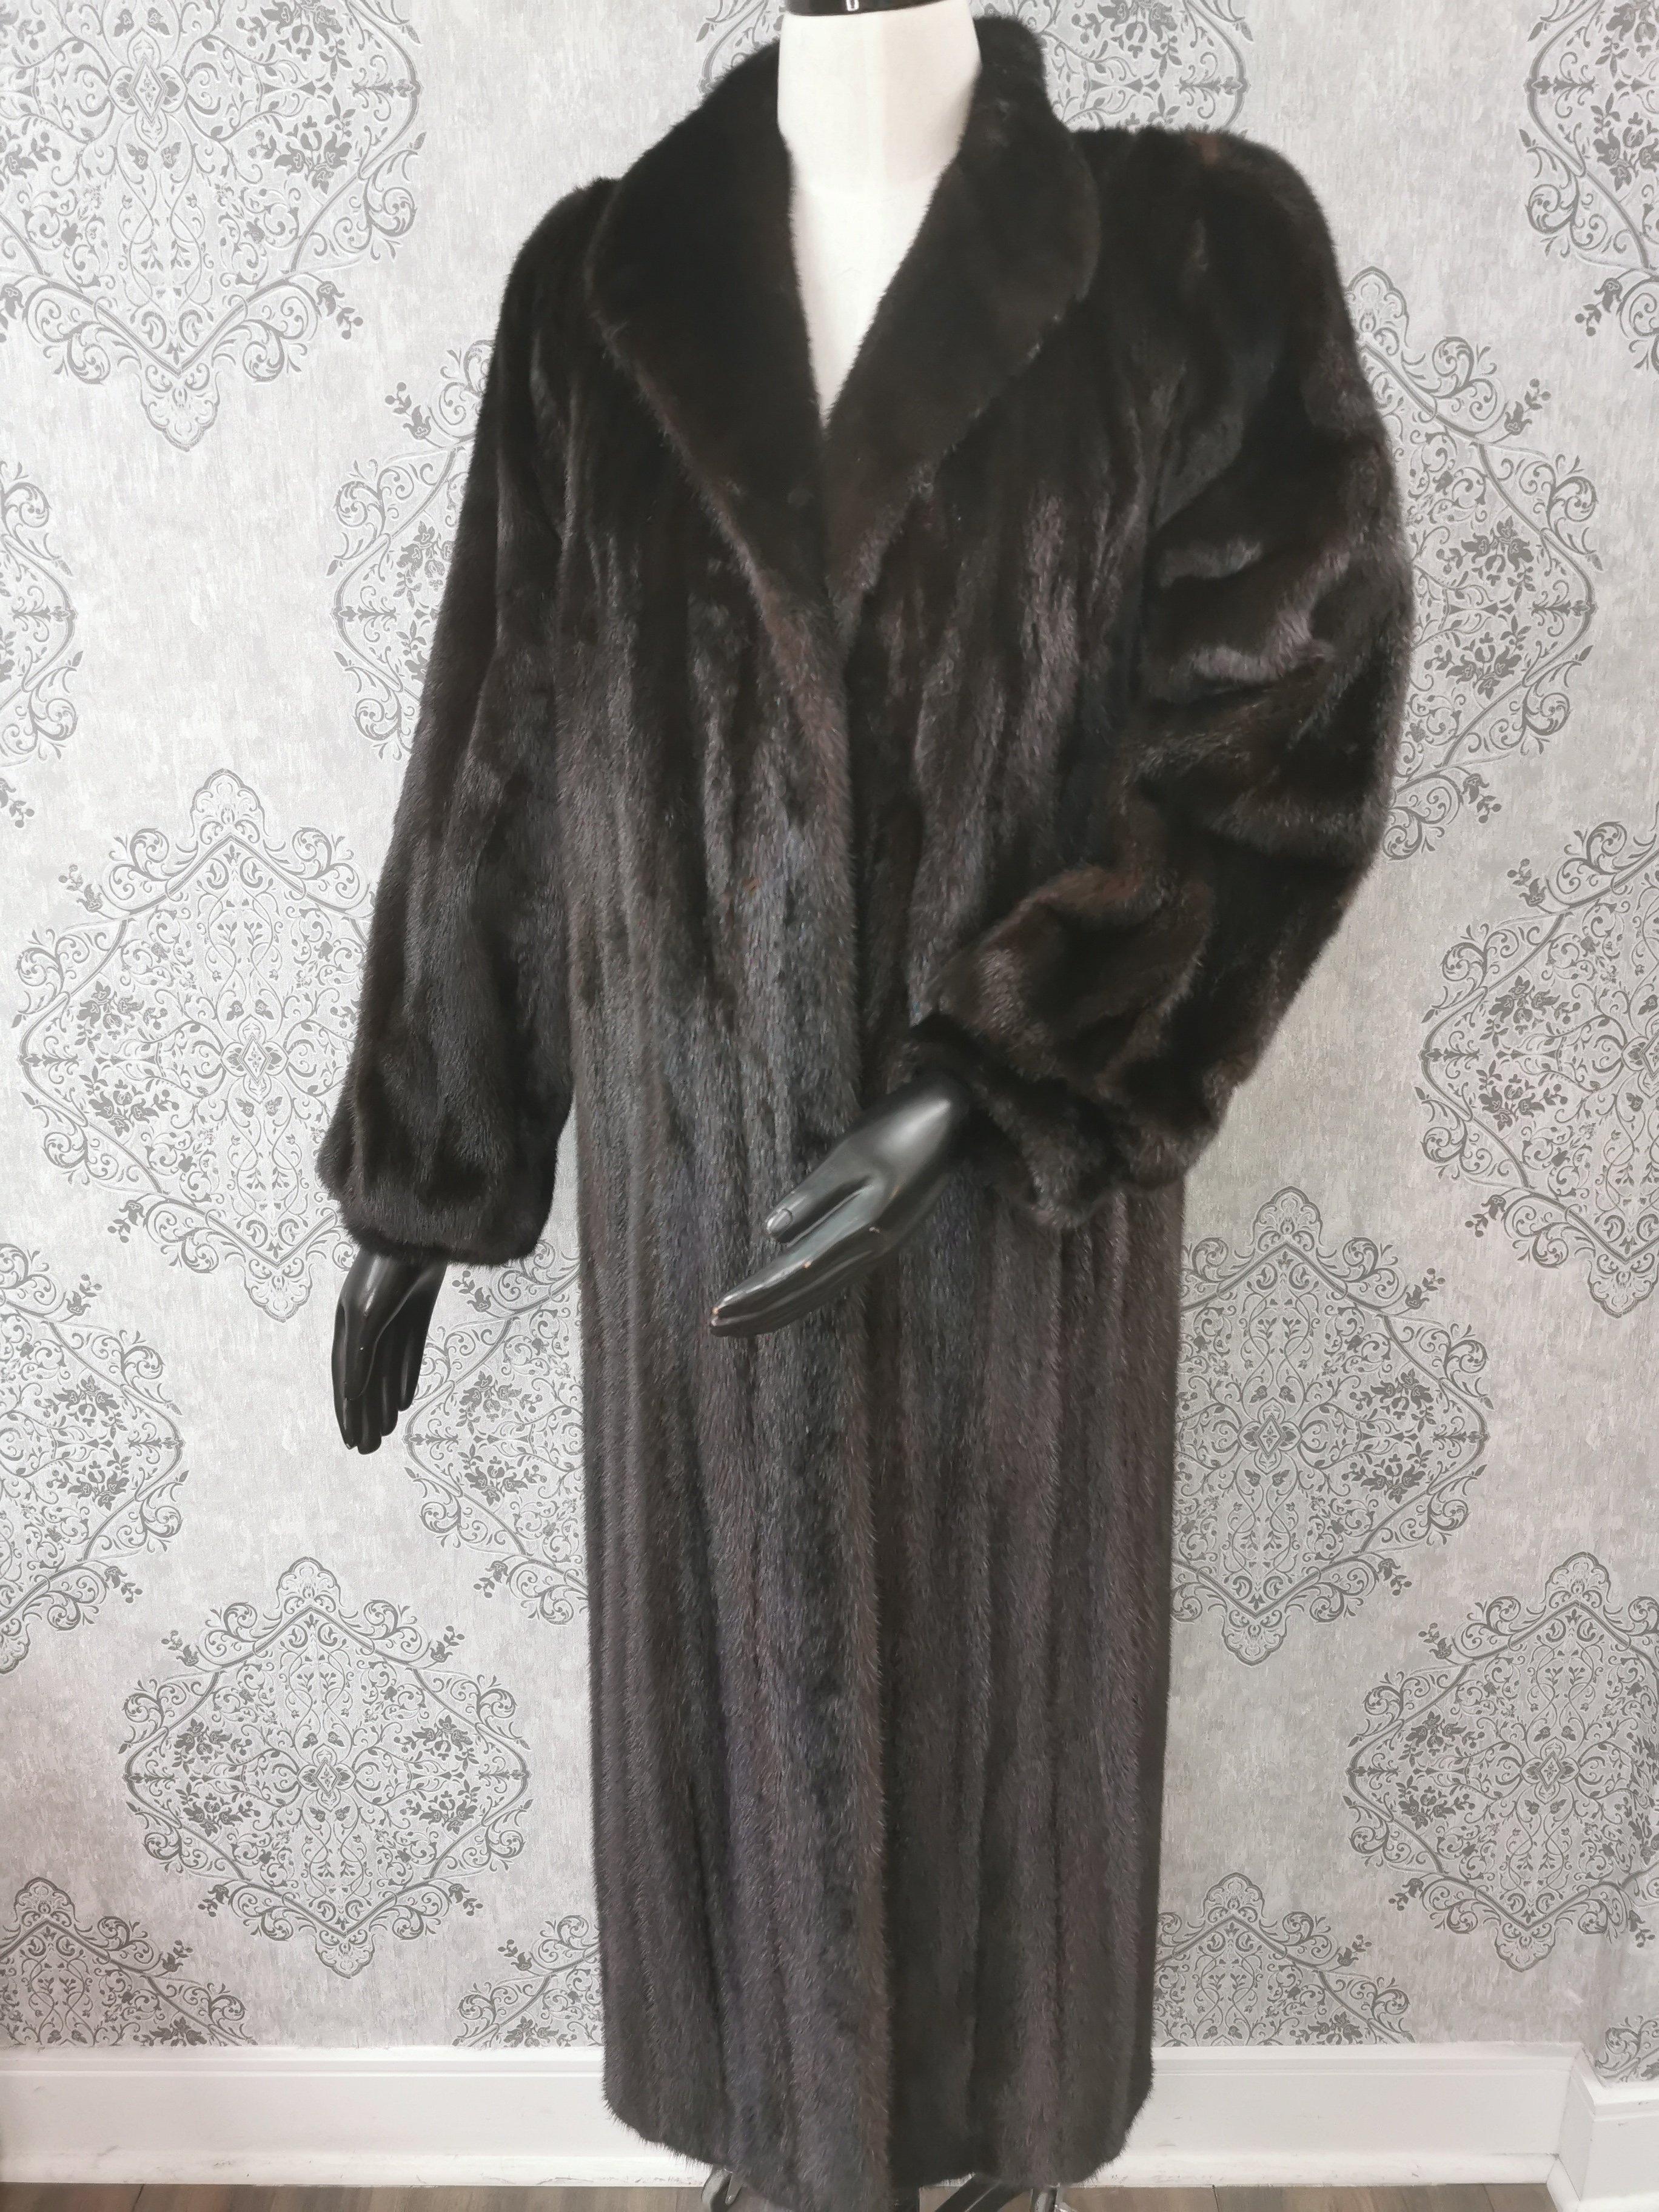 PRODUCT DESCRIPTION:

Brand New Perry Ellis Ranch Mink Fur Coat (Size 10-M)

Condition: New

Closure: Hooks & Eyes

Color: Black ranch

Material: Ranch Mink

Garment type: Mid-length coat

Sleeves: Straight sleeves with bracelet cuffs

Pockets: Two